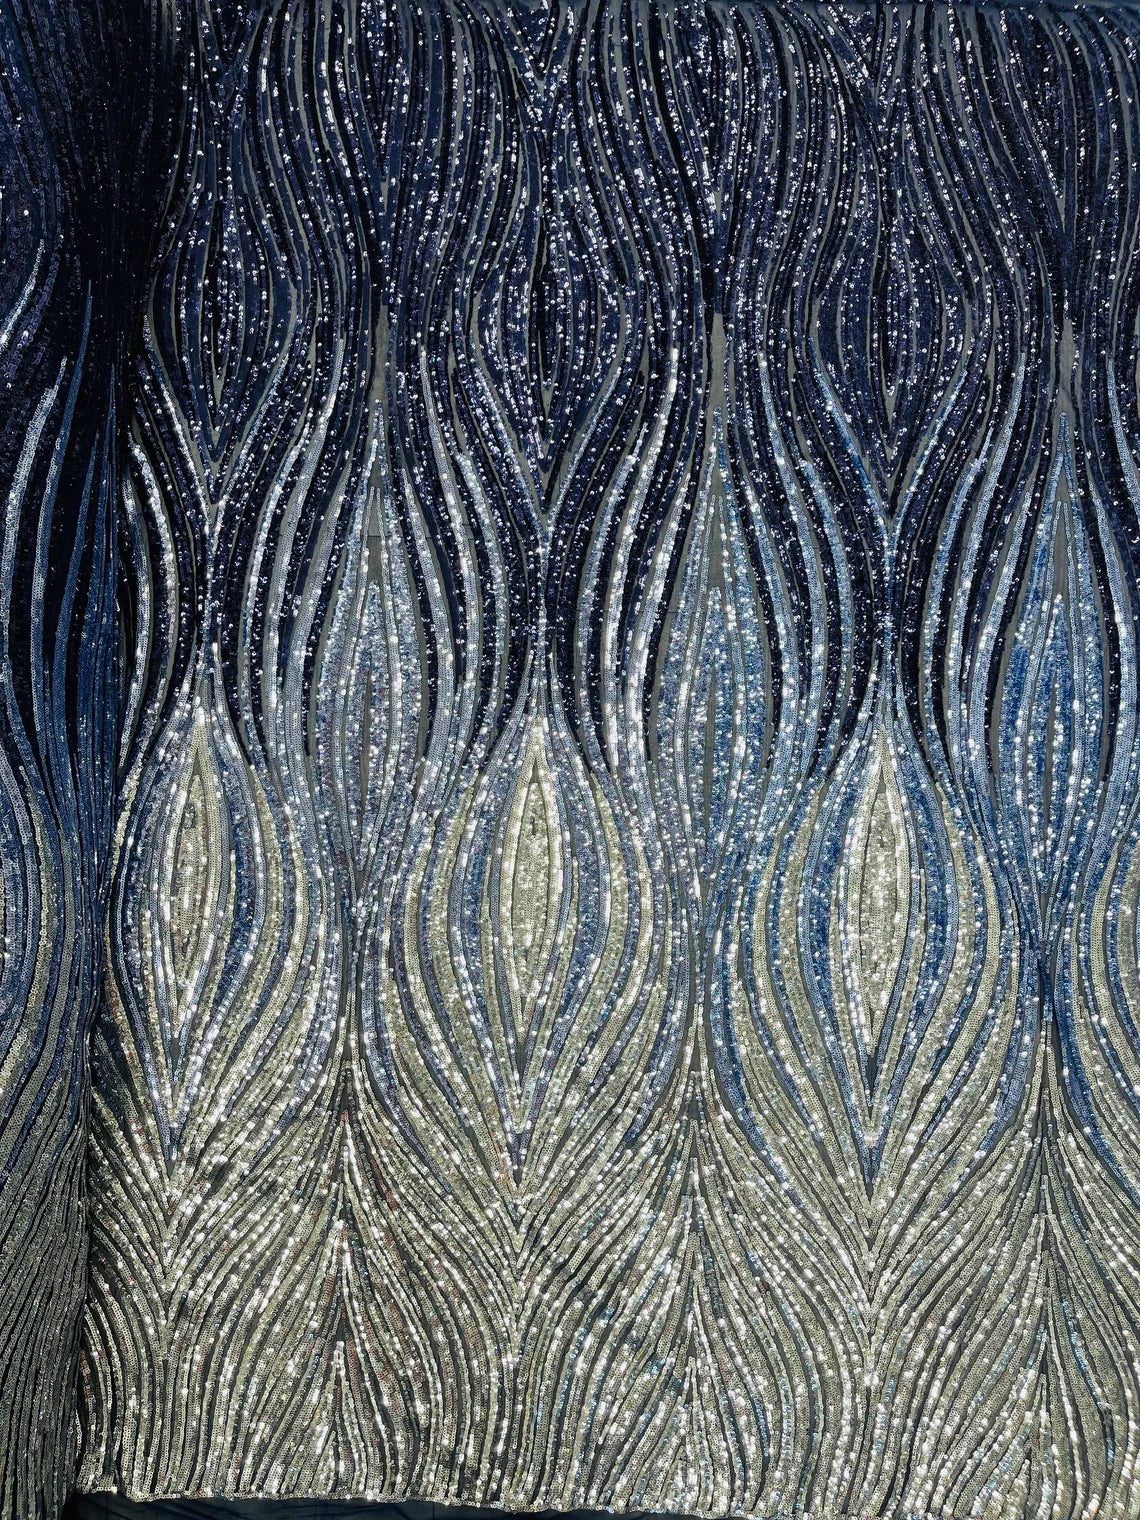 Silver Stretch Mesh w/Silver Sequins Fabric 50 Wide by The Yard